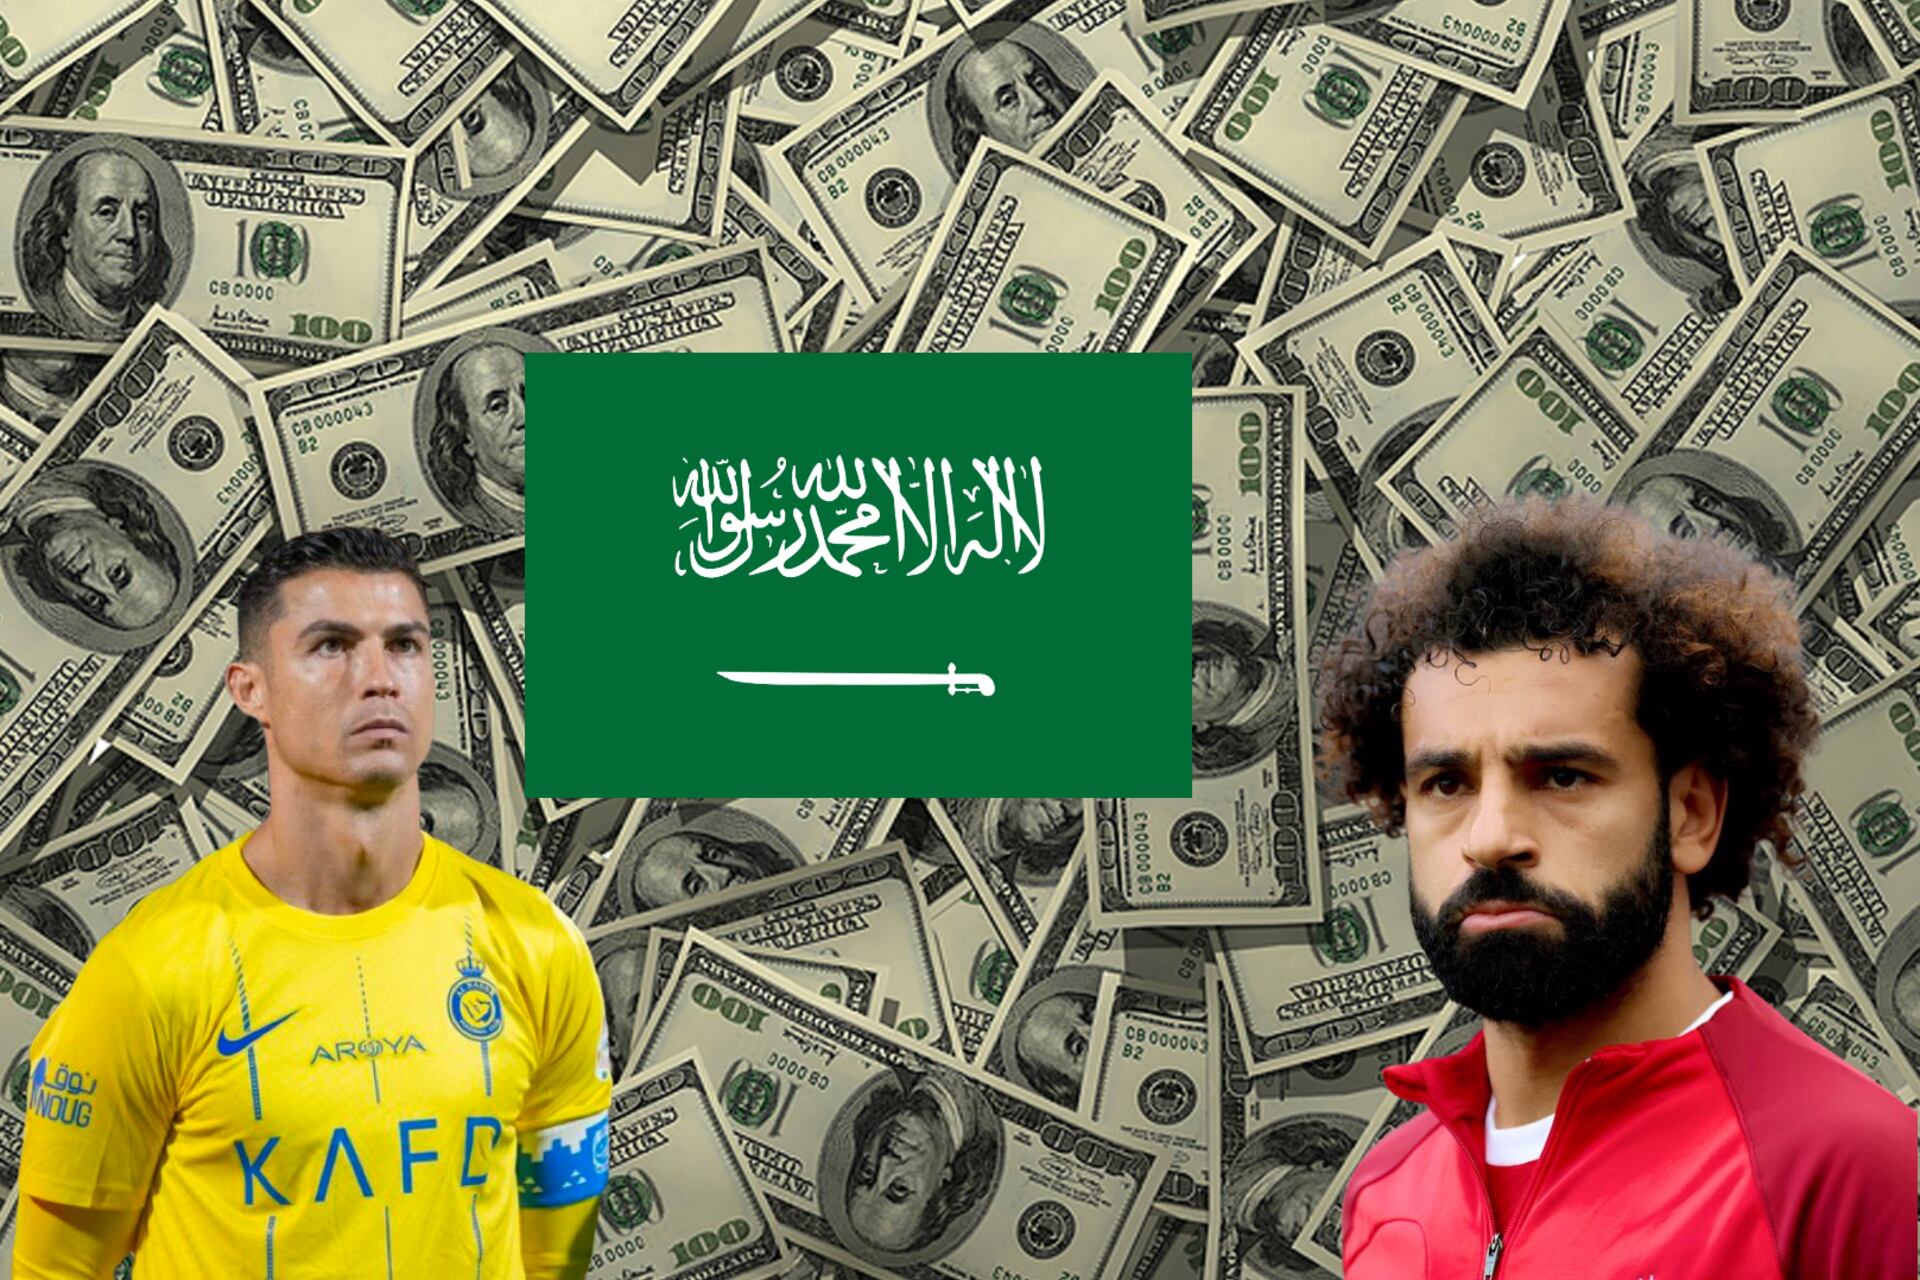 Not Cristiano's Al Nassr, the Saudi club offering this to Liverpool for Salah